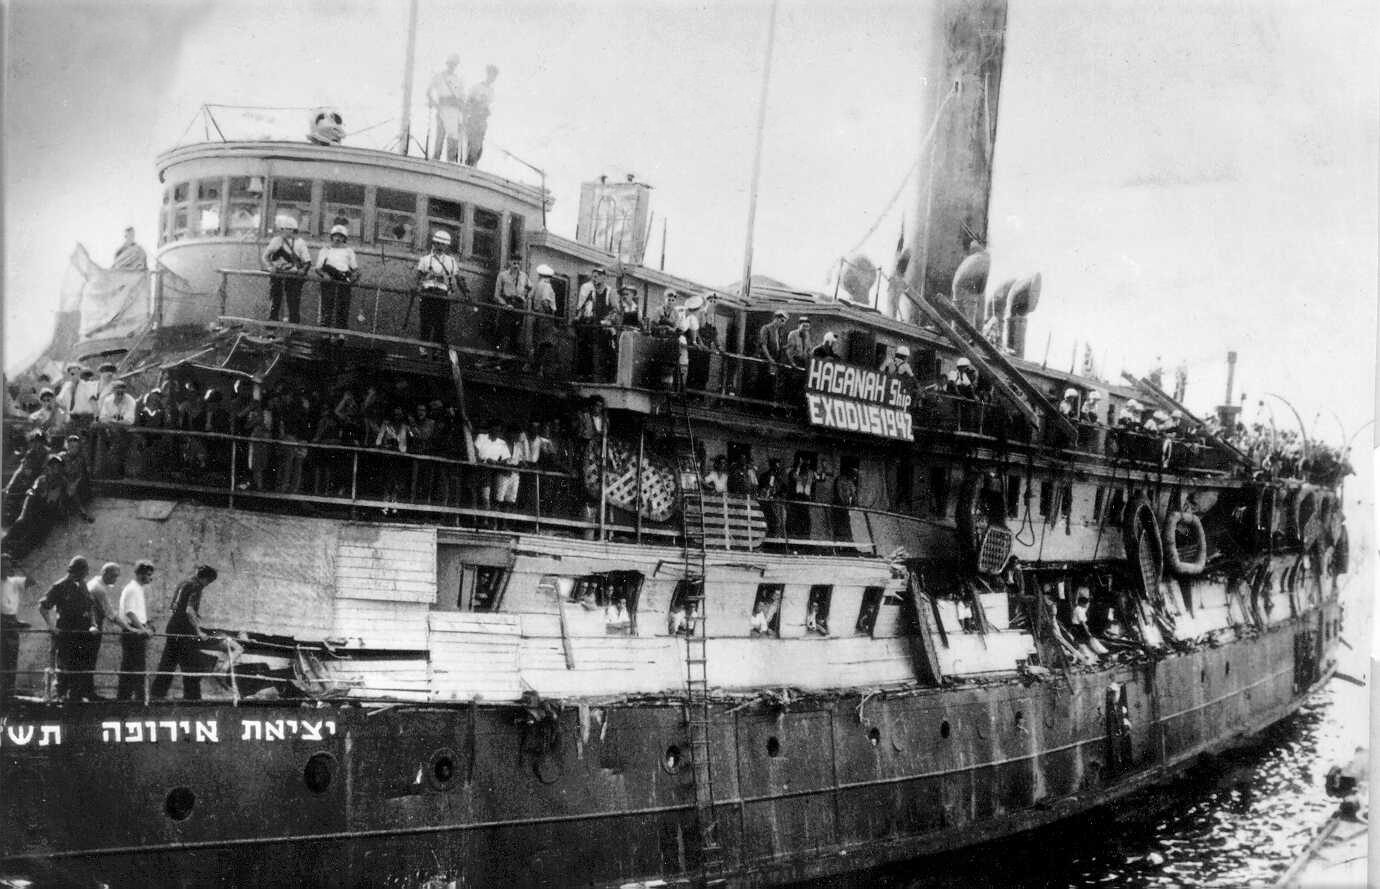 The Exodus 1947 heads to Palestine from France